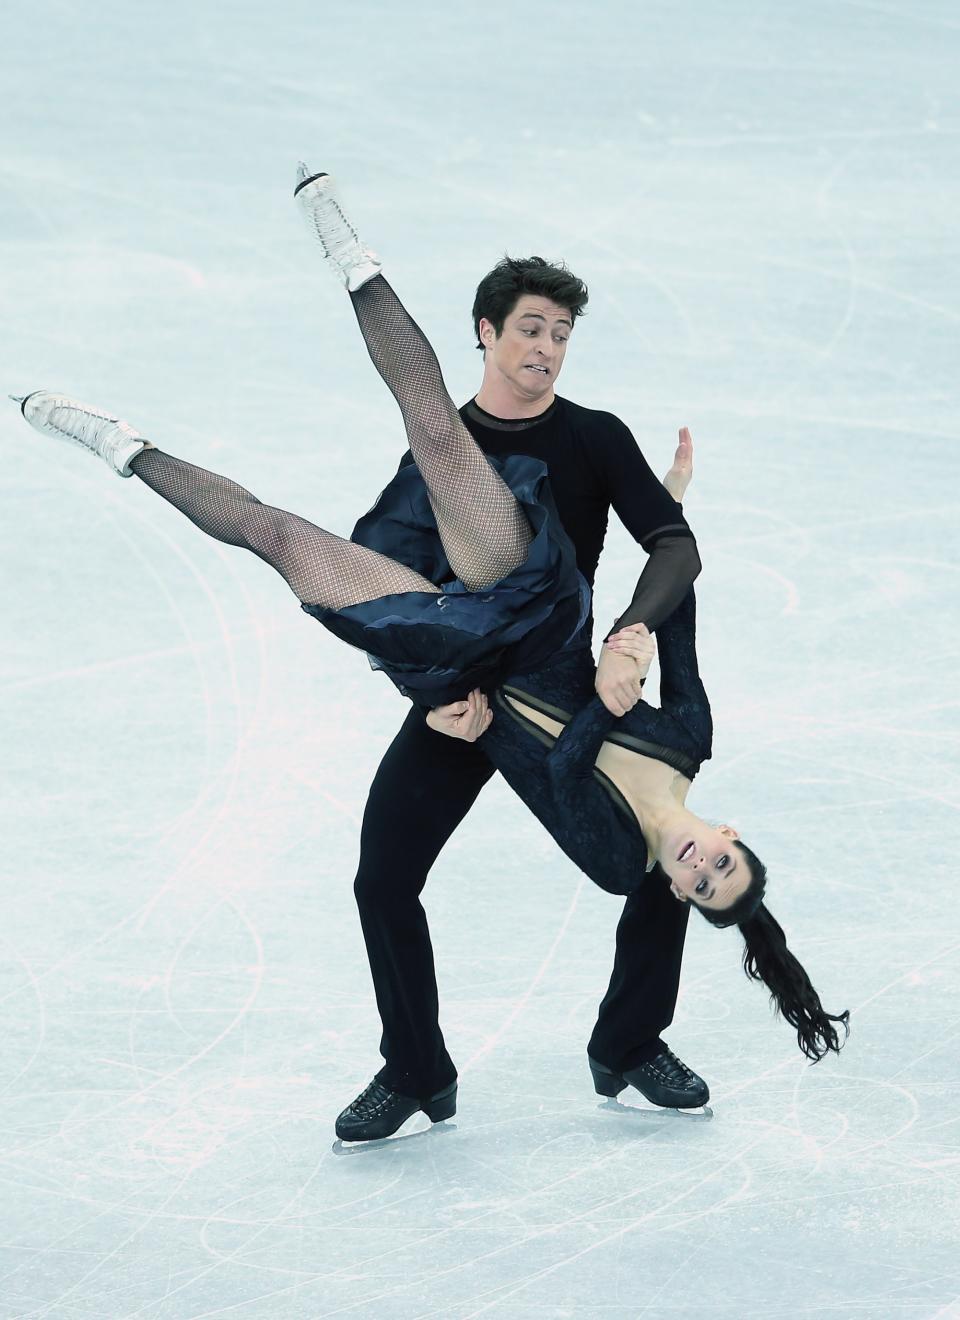 SOCHI, RUSSIA - DECEMBER 08: Tessa Virtue and Scott Moir of Canada perform in the Ice Dance Free Dance during the Grand Prix of Figure Skating Final 2012 at the Iceberg Skating Palace on December 8, 2012 in Sochi, Russia. (Photo by Julian Finney/Getty Images)